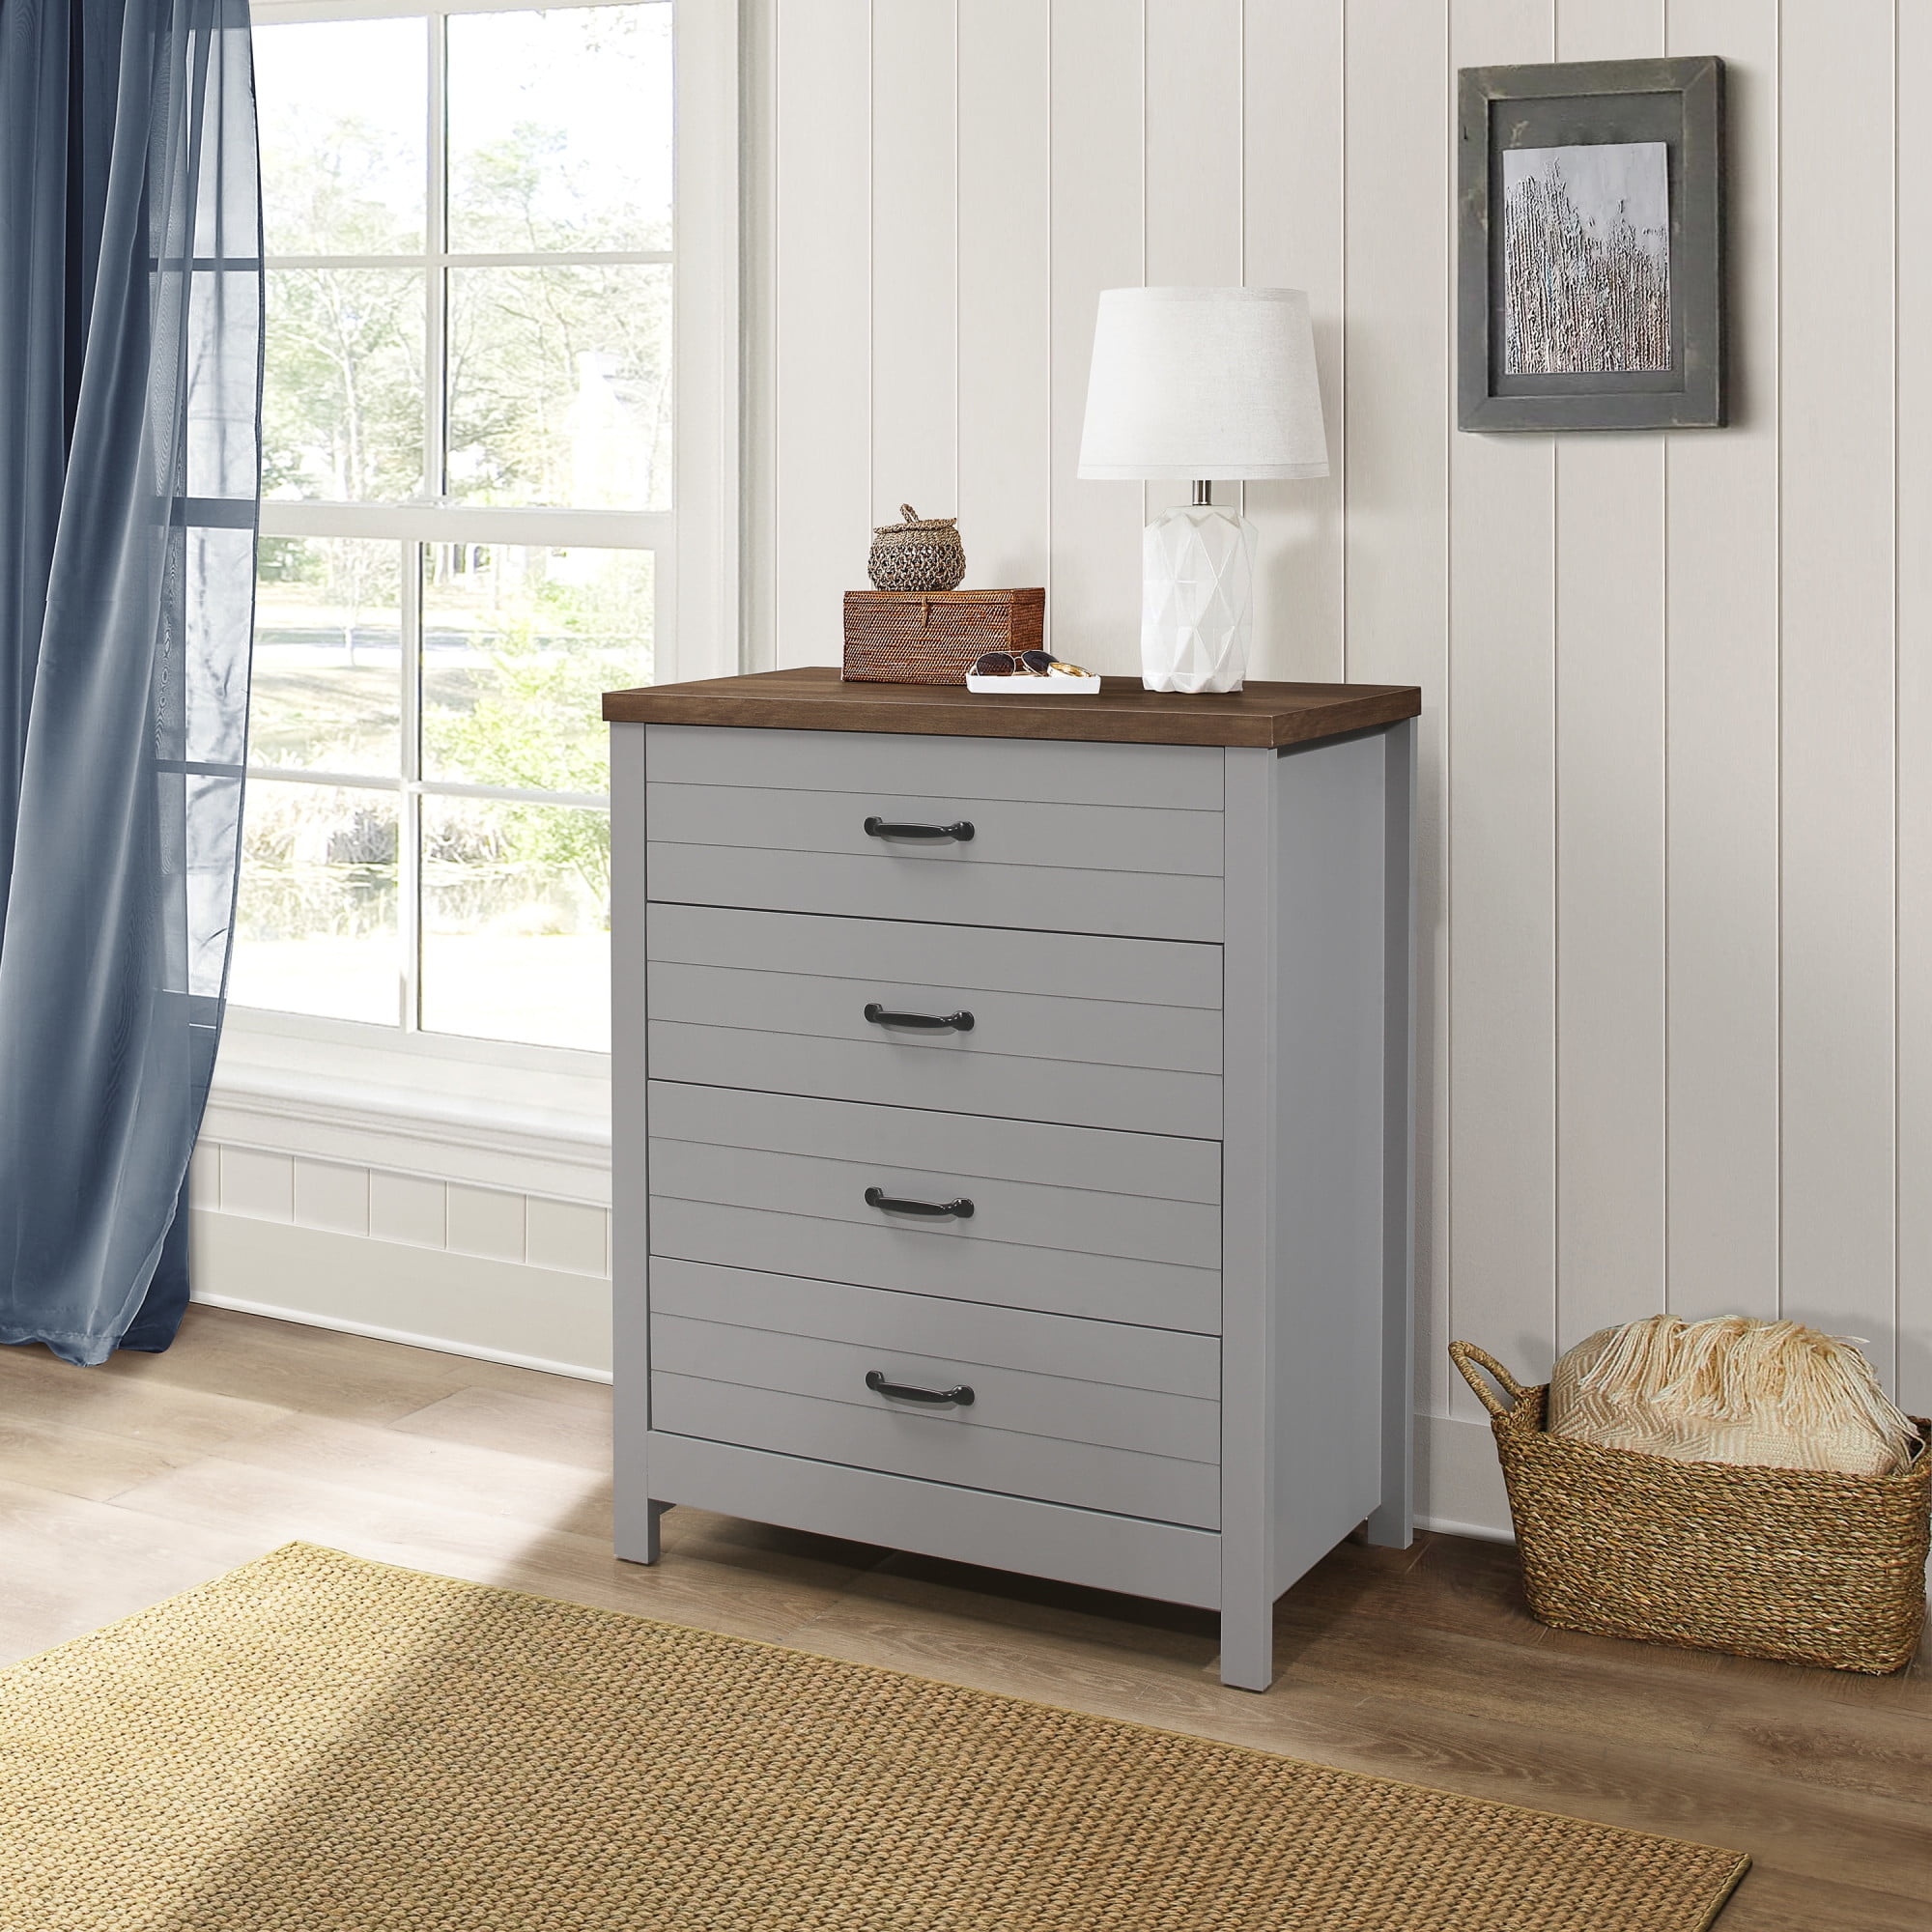 Lancaster Grey Country style bedroom furniture merchants 7 Drawer chest 